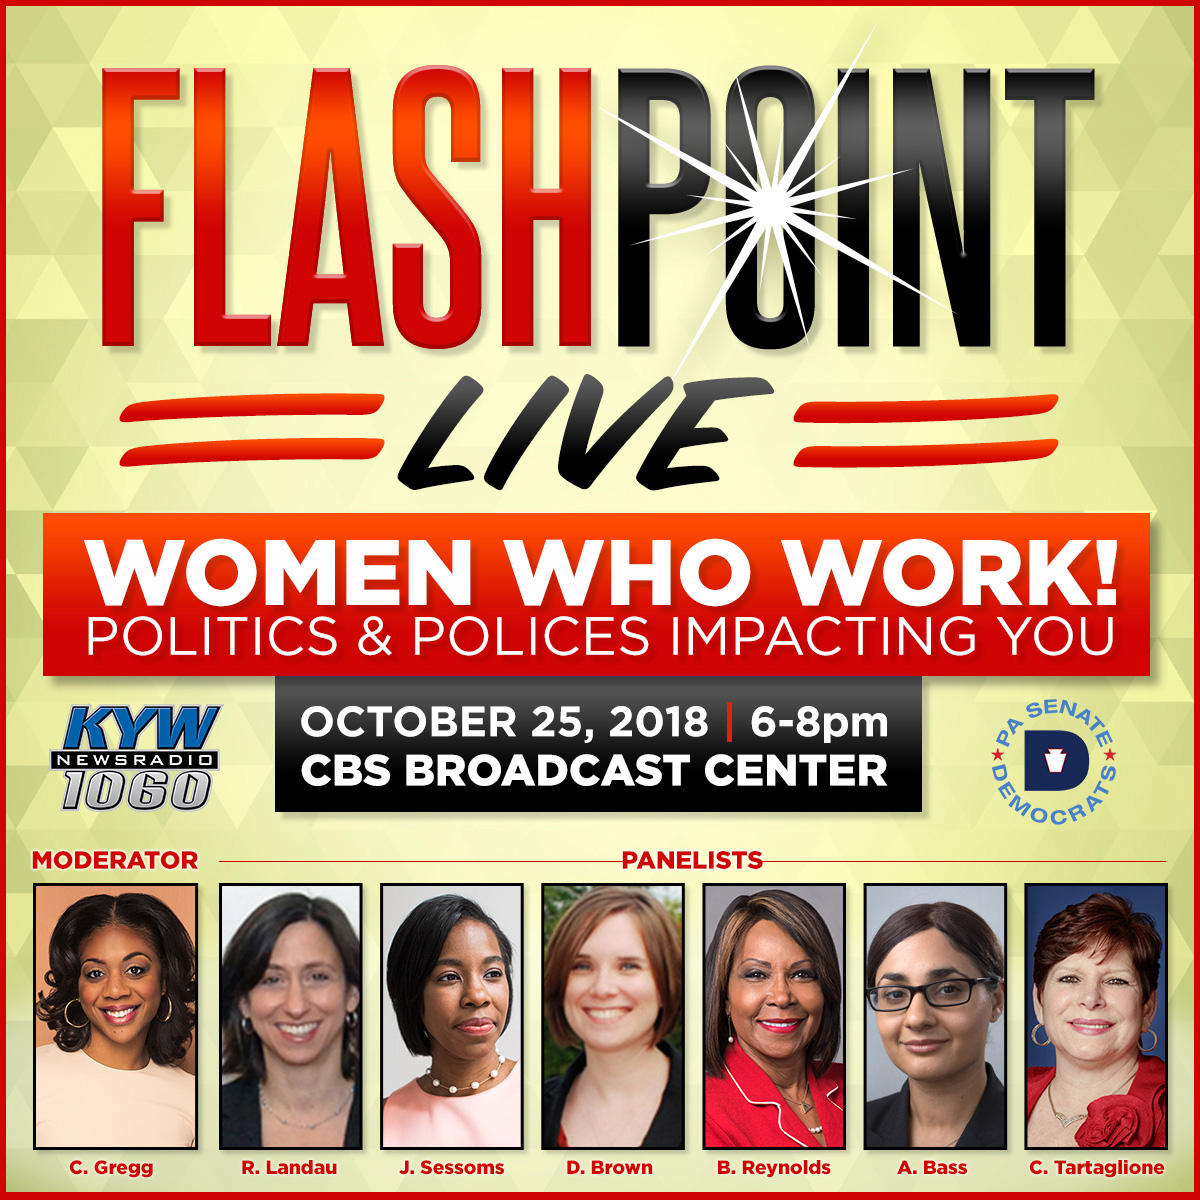 Senator Tartaglione to Join other Prominent Professional Women for Live Panel Discussion on Workplace Issues